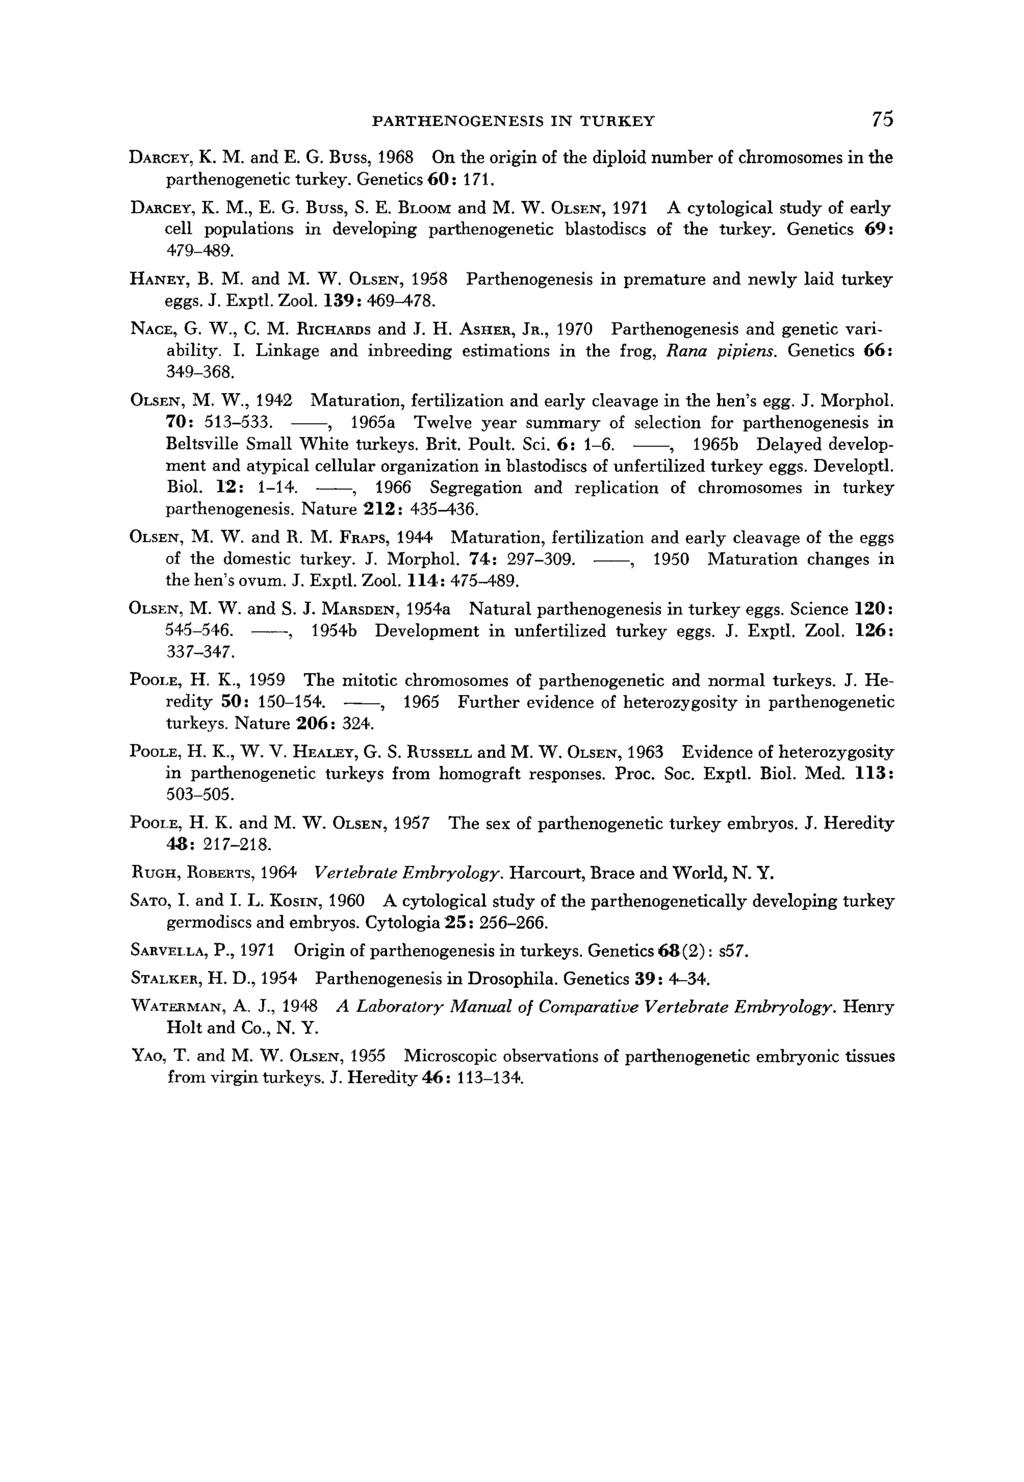 PARTHENOGENESIS IN TURKEY 75 DARCEY, K. M. and E. G. Buss, 1968 On the origin of the diploid number of chromosomes in the parthenogenetic turkey. Genetics 60 : 171. DARCEY, K. M., E. G. Buss, S. E. BLOOM and M.